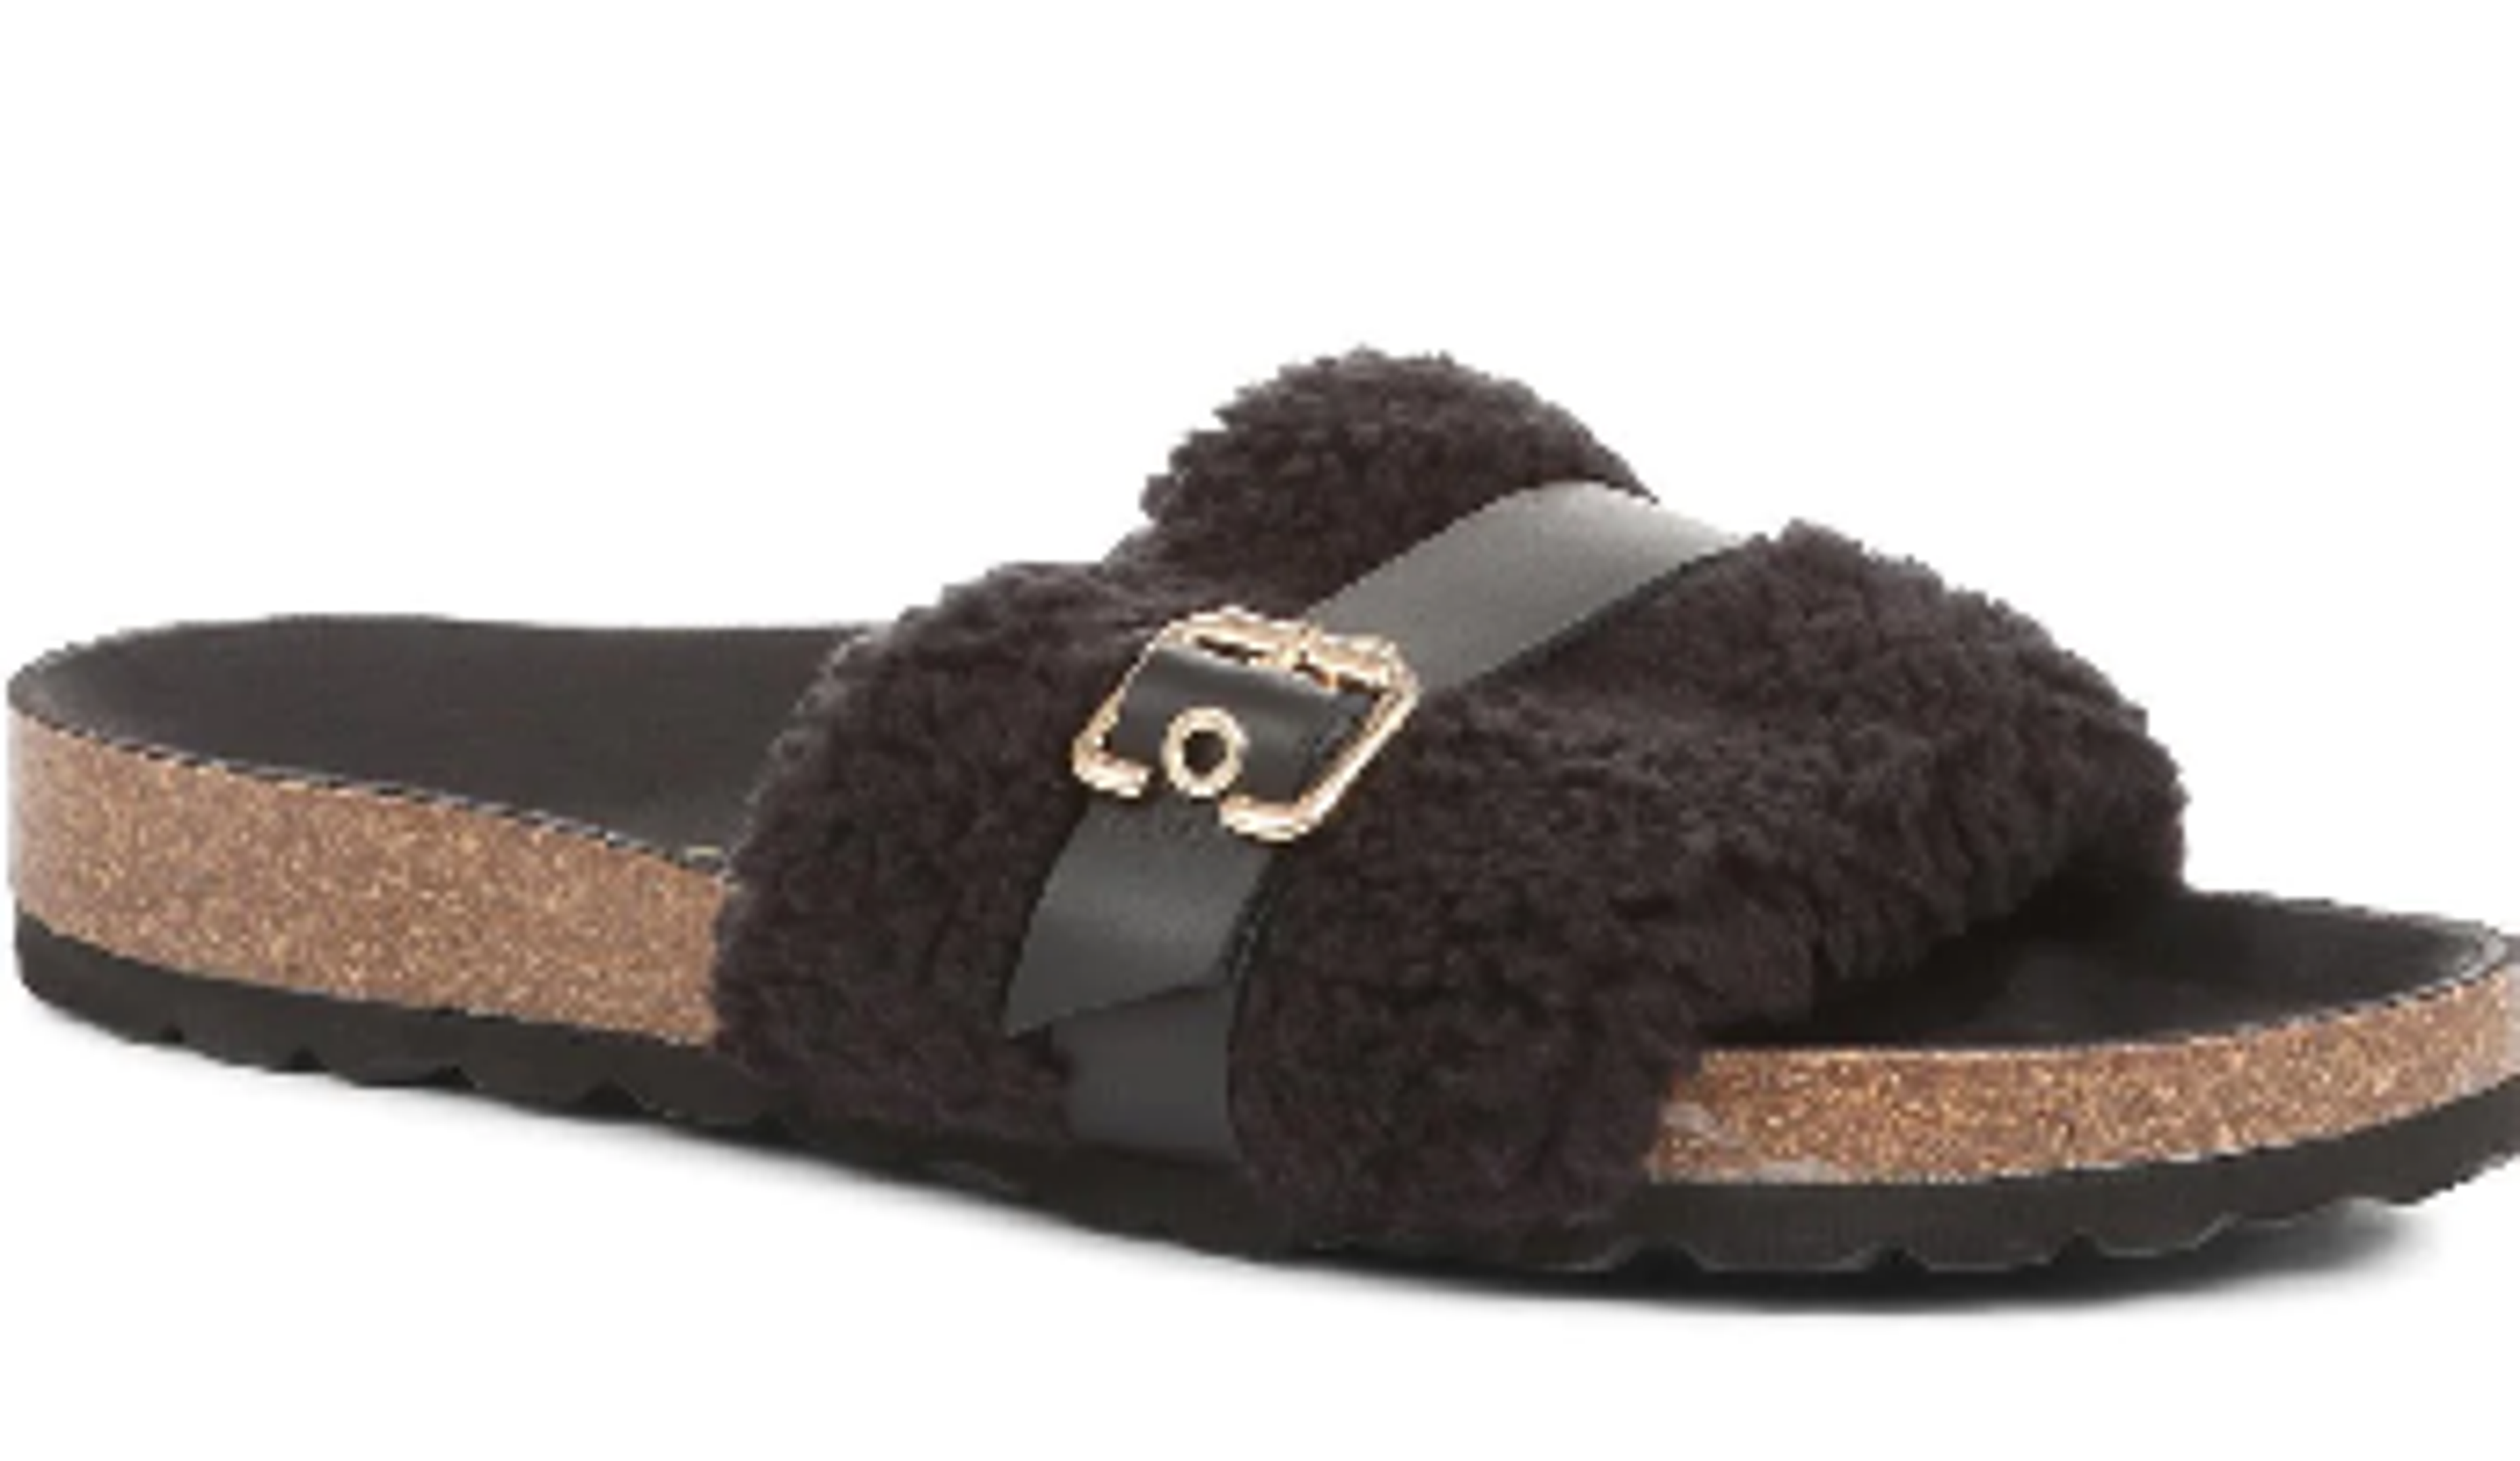  A single slider with a thick, fluffy, black upper strap, and brown cork soles. 